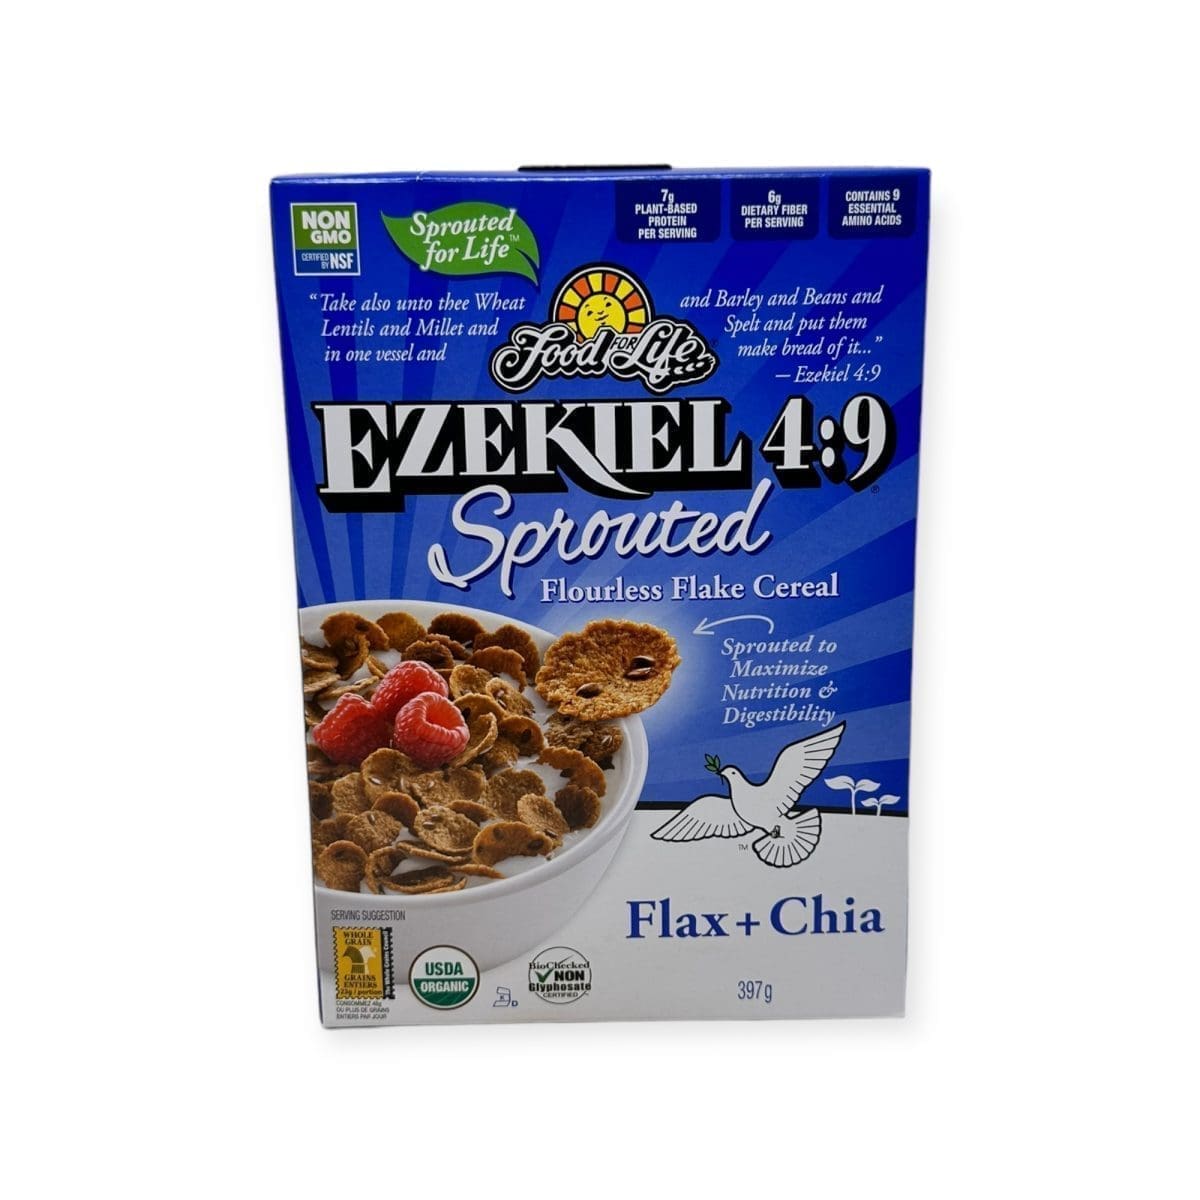 Ezekiel 4:9 Sprouted Flourless Flake Cereal Flax + Chia (397g)